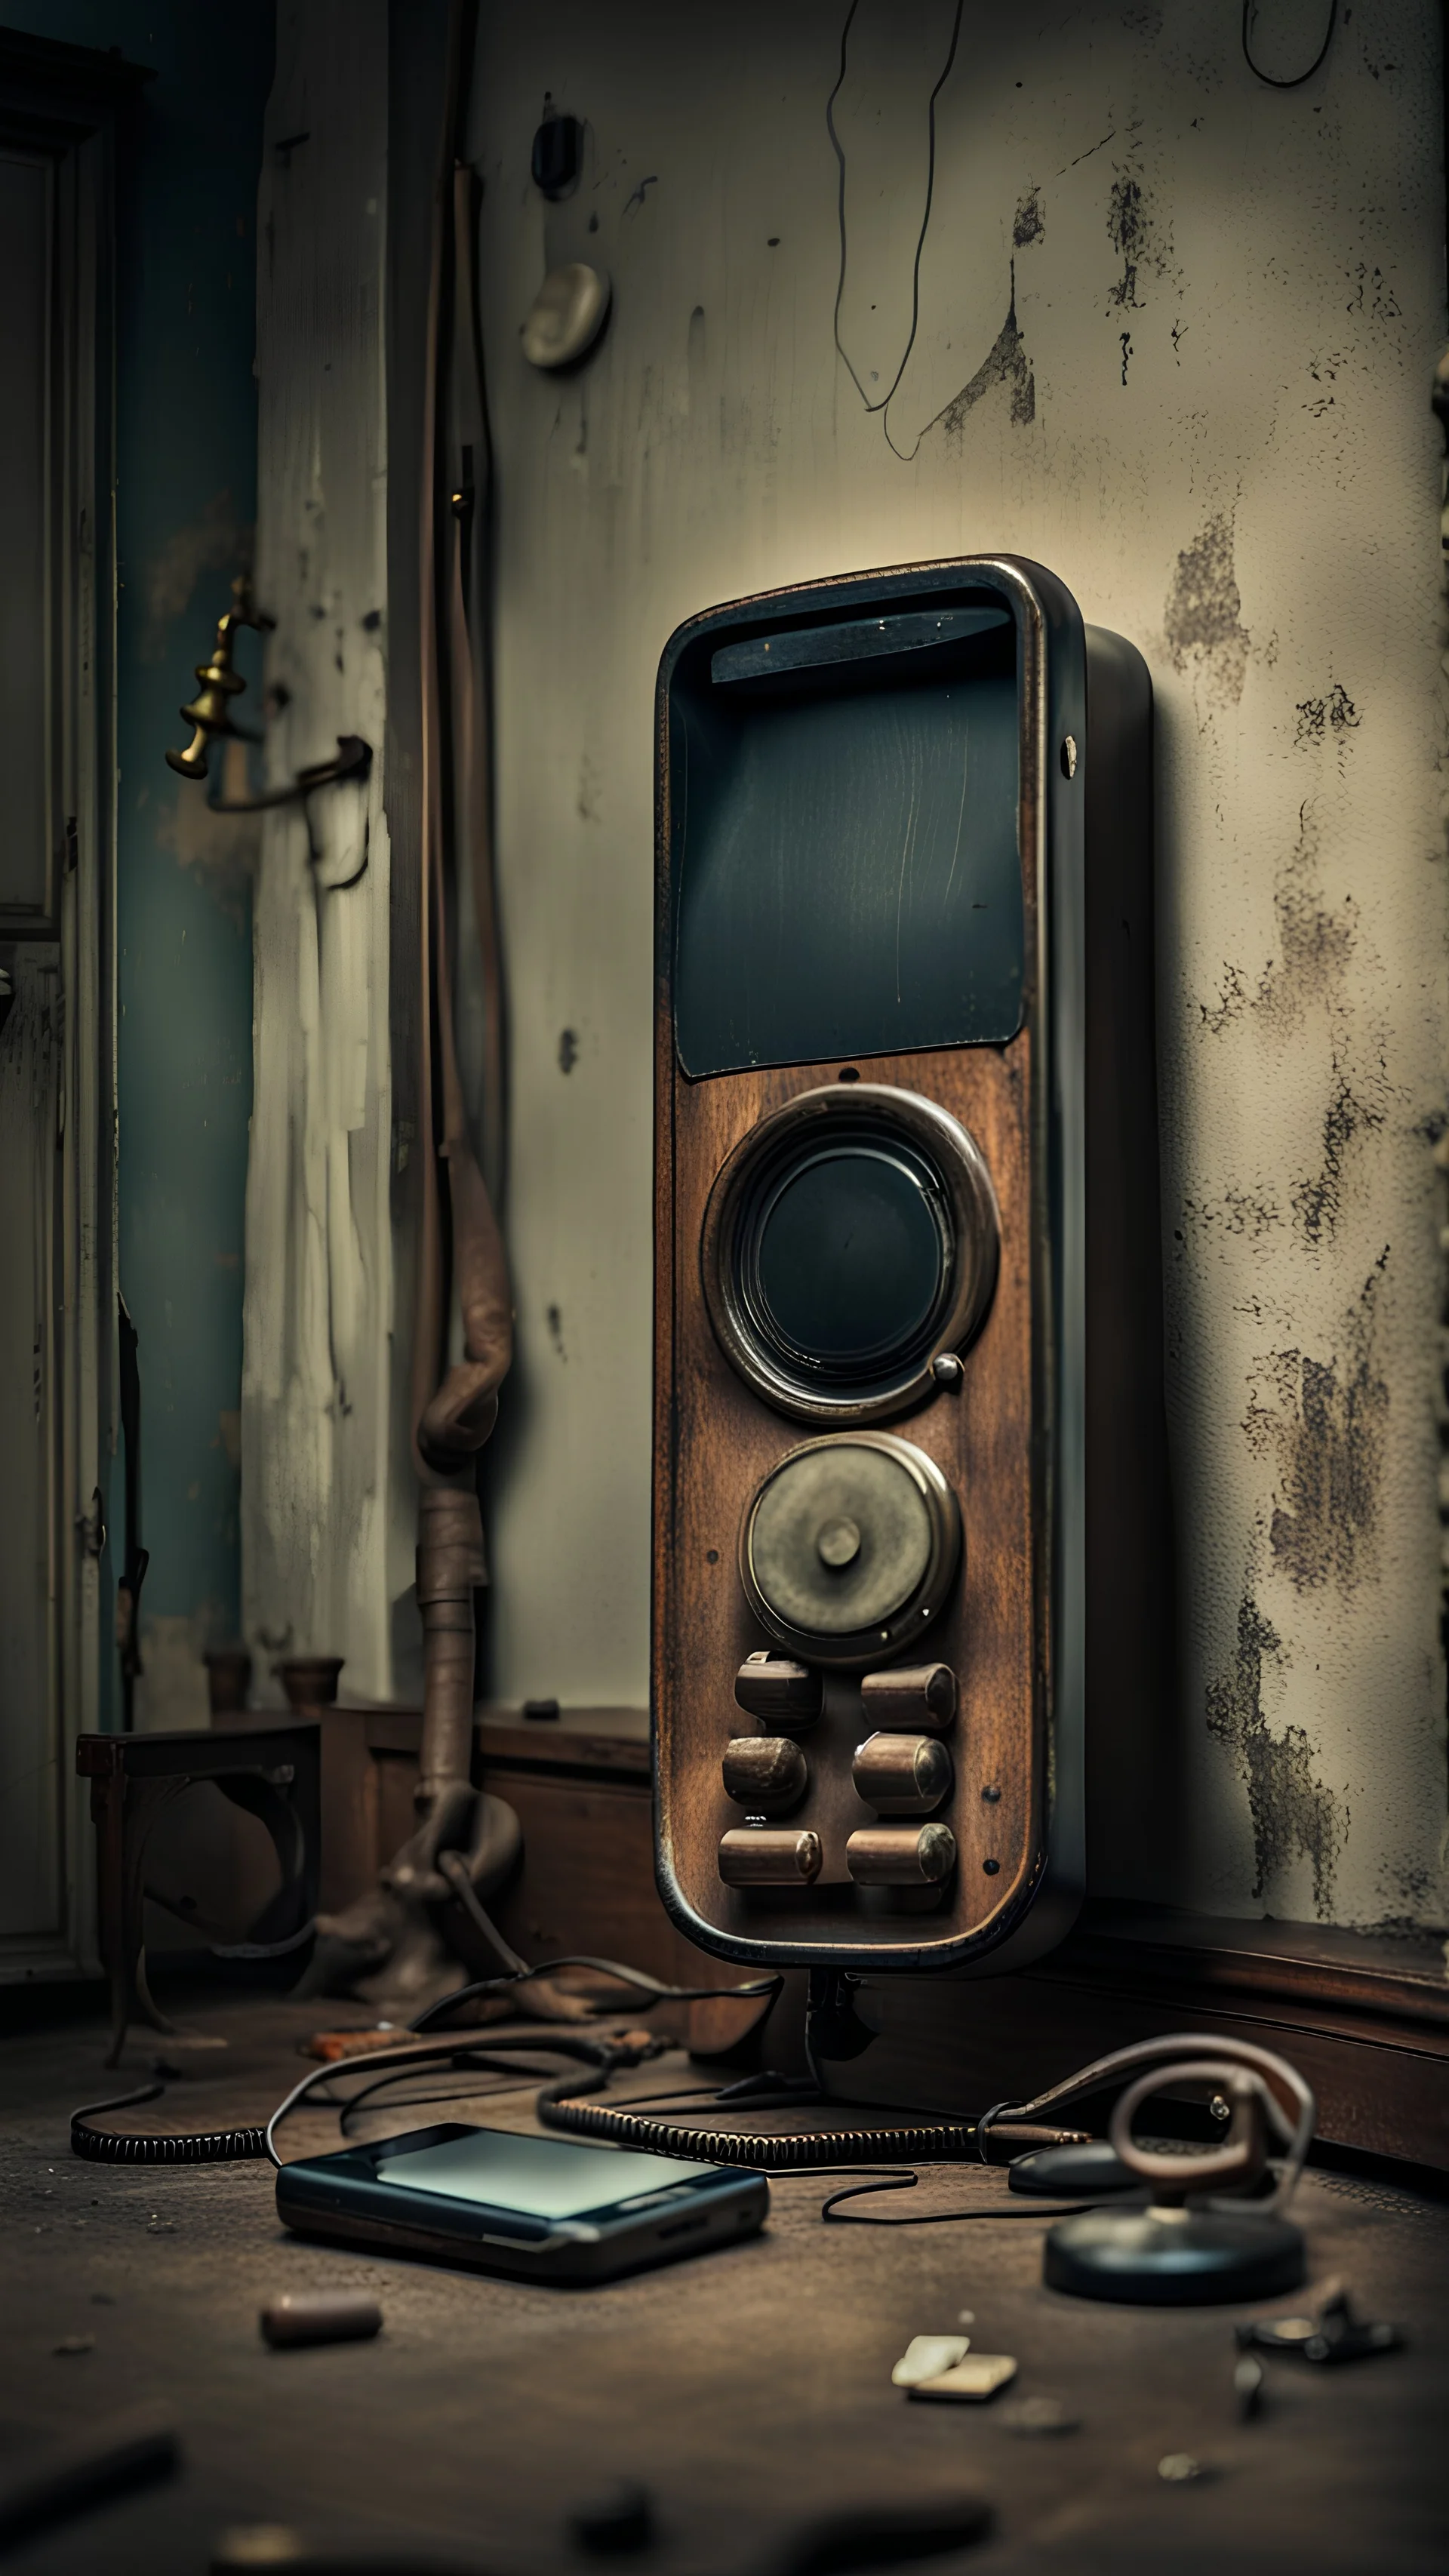 In a creepy old room, there is a phone in the center, the entire frame is focused on it.